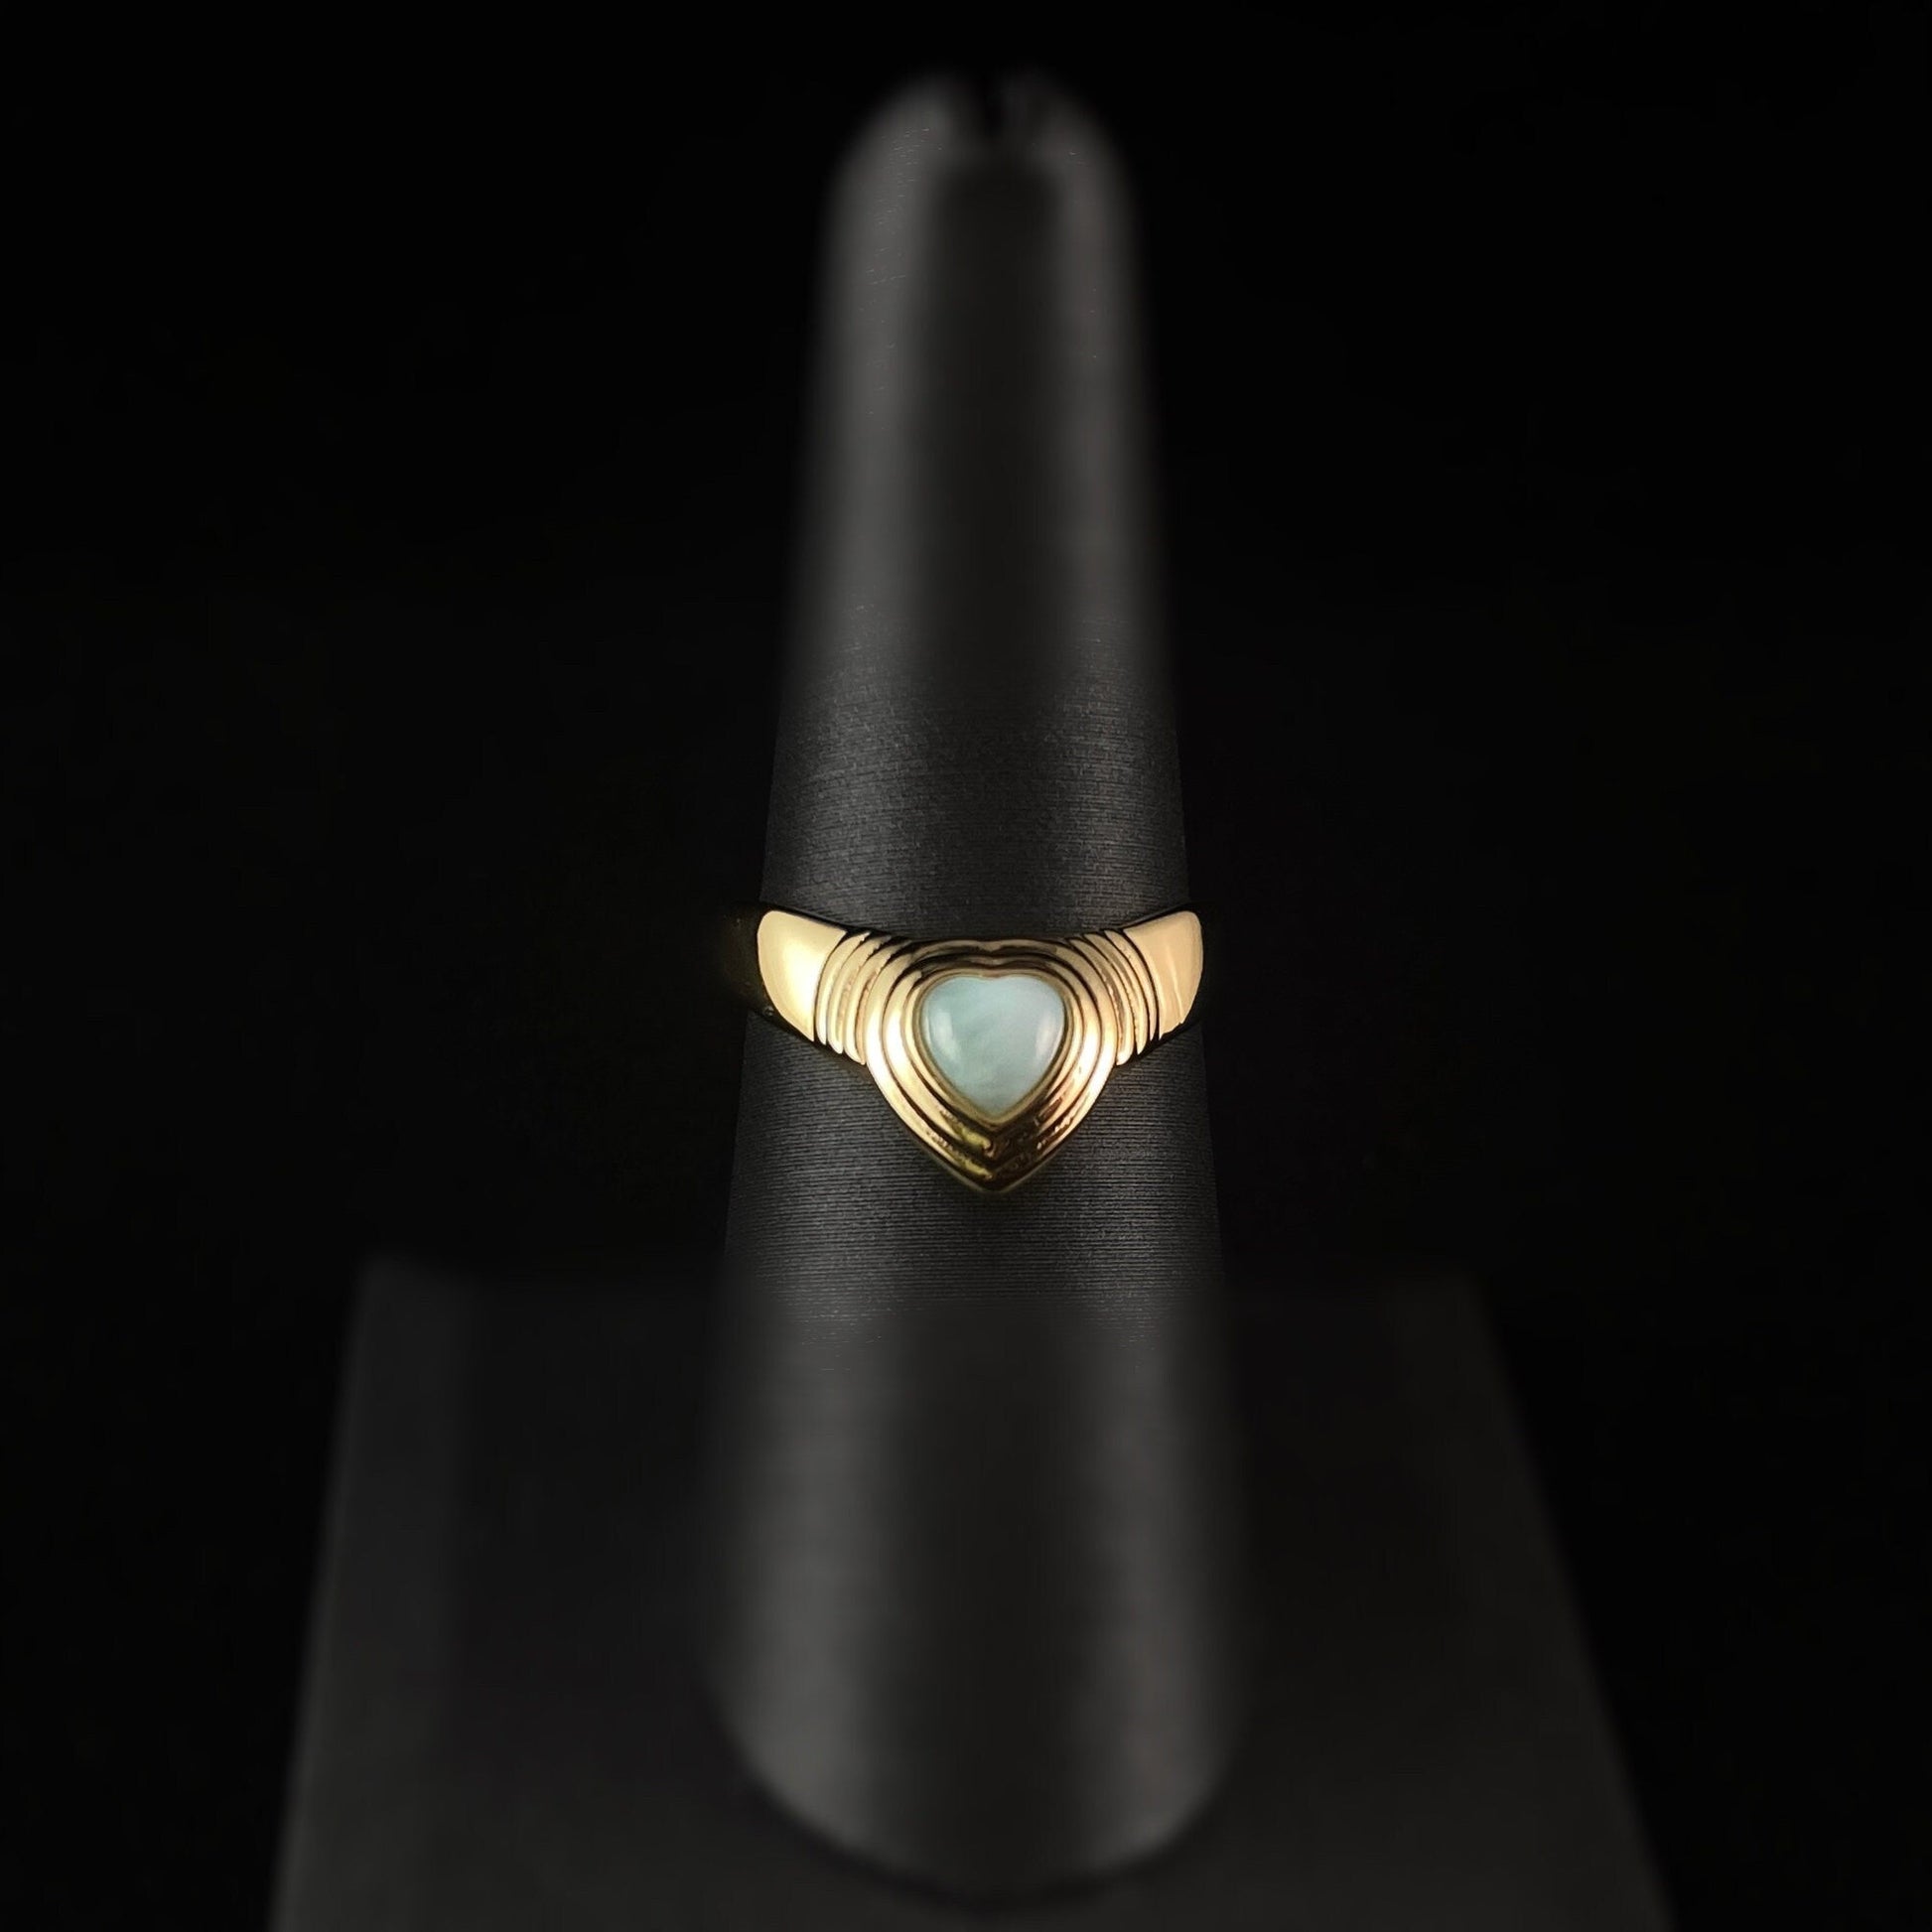 Heart Shaped Larimar Ring with Gold Band, Size 7 - Heart of Stone